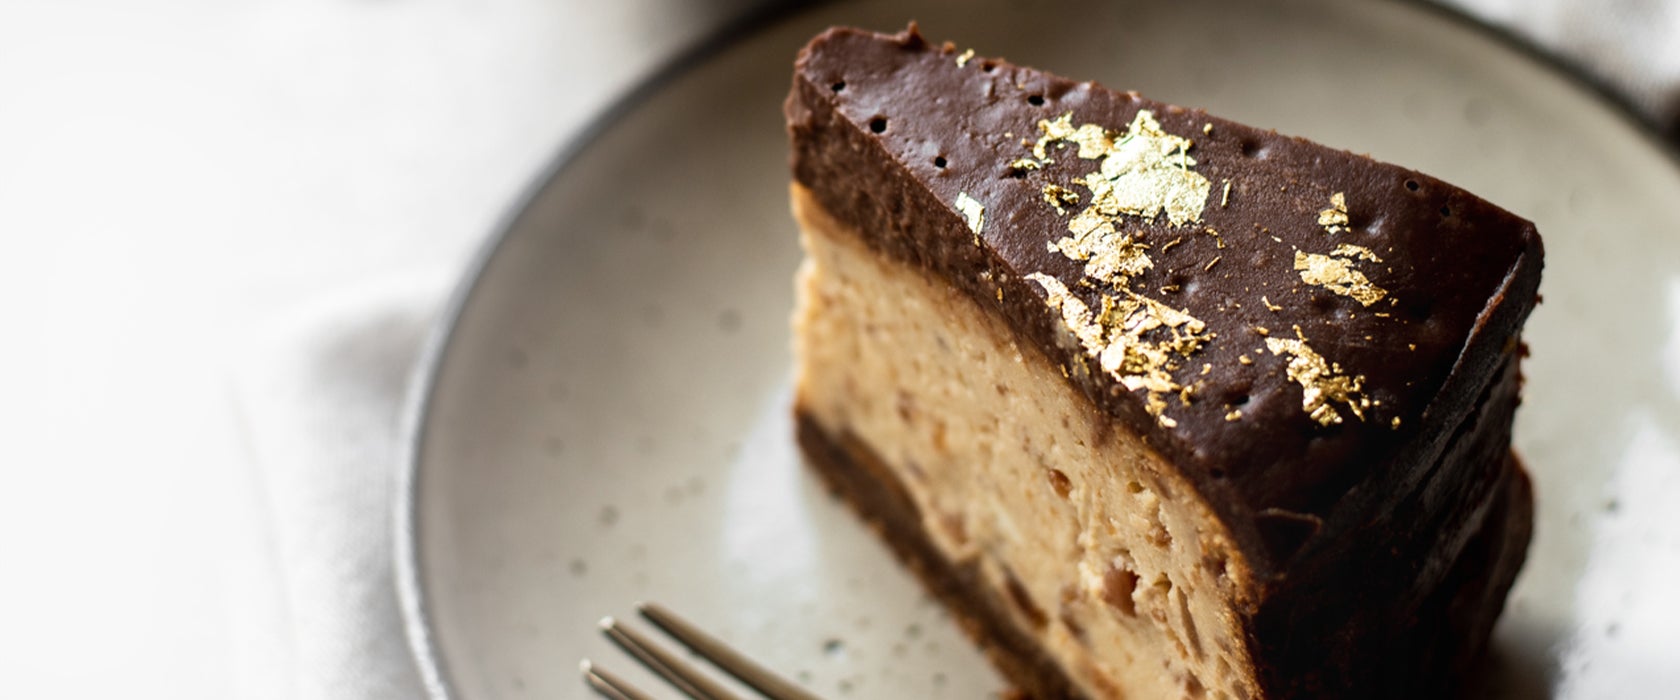 Slice of homemade peanut butter and chocolate baked cheesecake